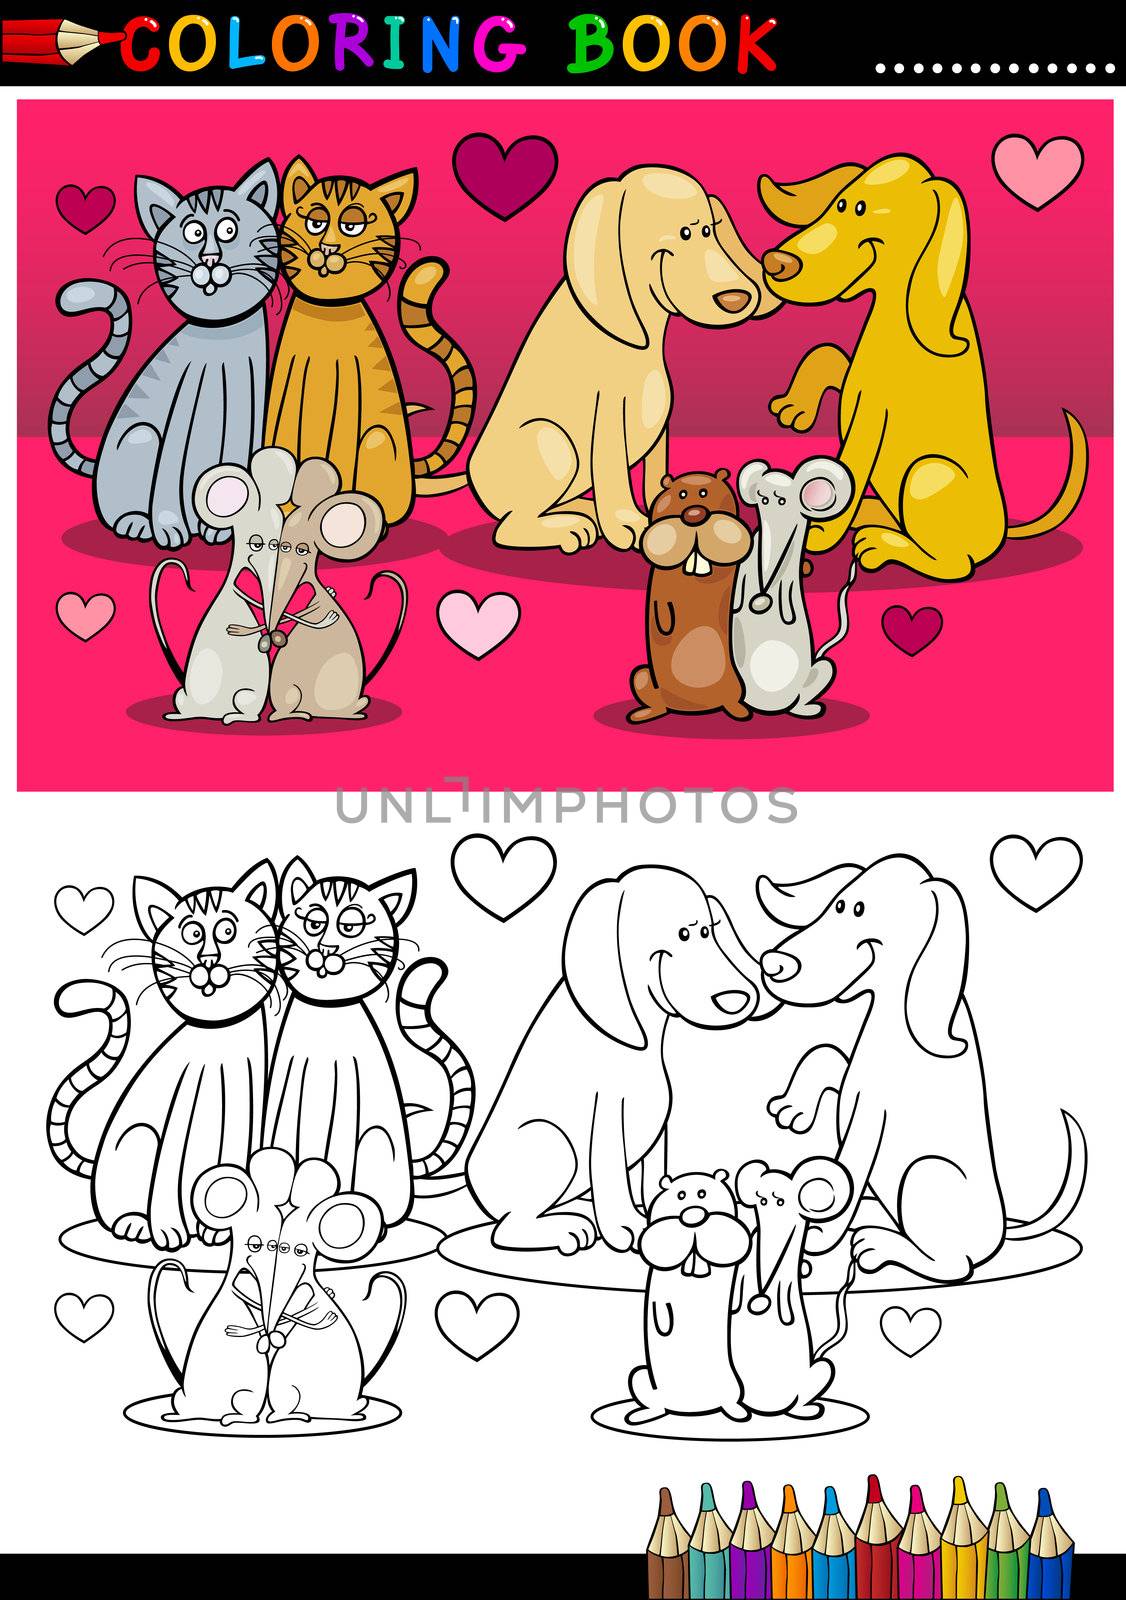 Animals in love cartoon for coloring book by izakowski